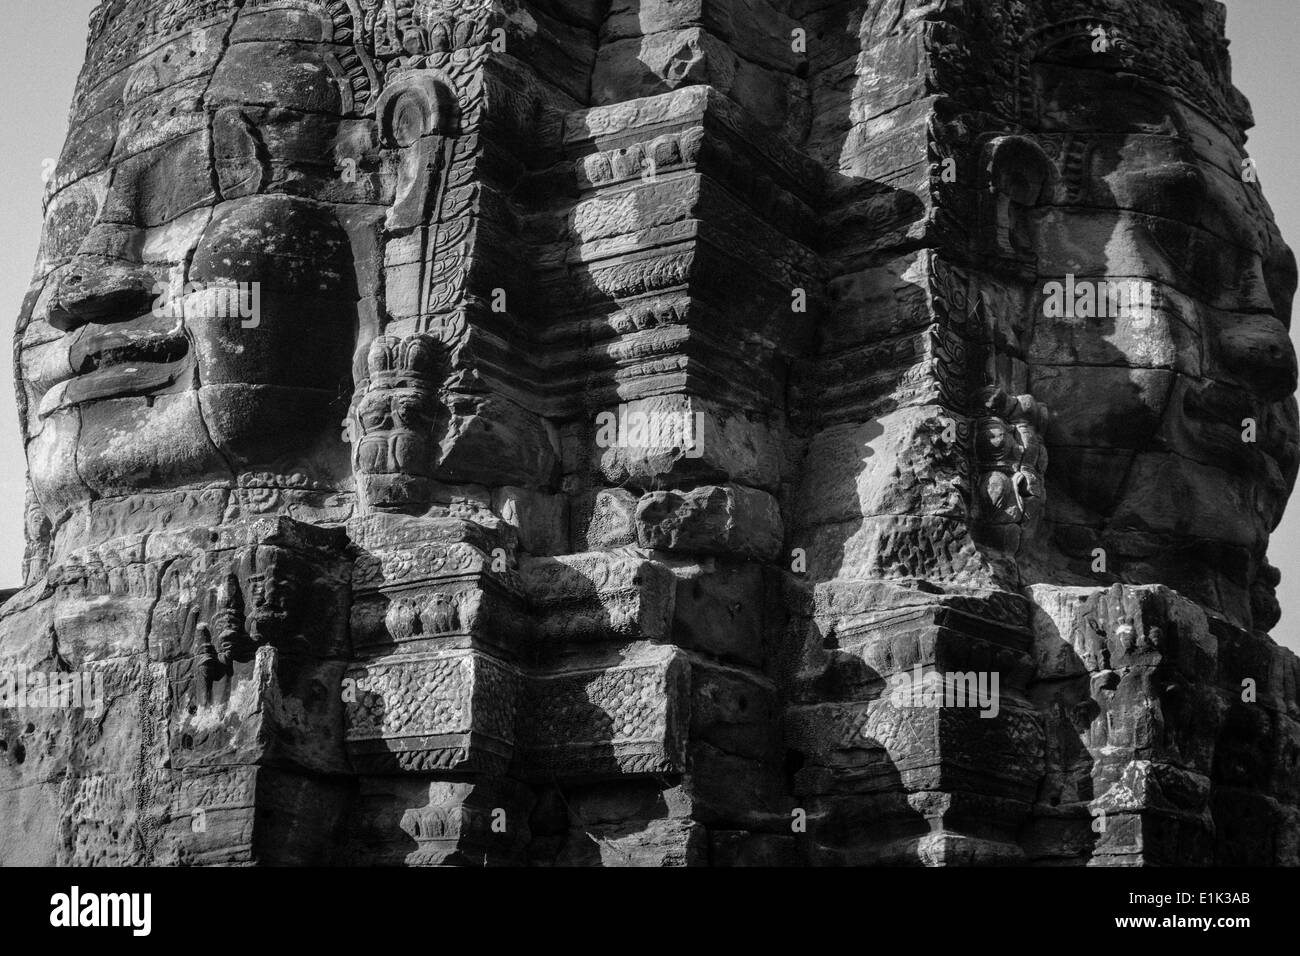 The Bayon is a temple in Angkor Thom, Angkor, Siem Reap, Cambodia. Its key feature are the 216 gigantic stone smiling faces. Stock Photo